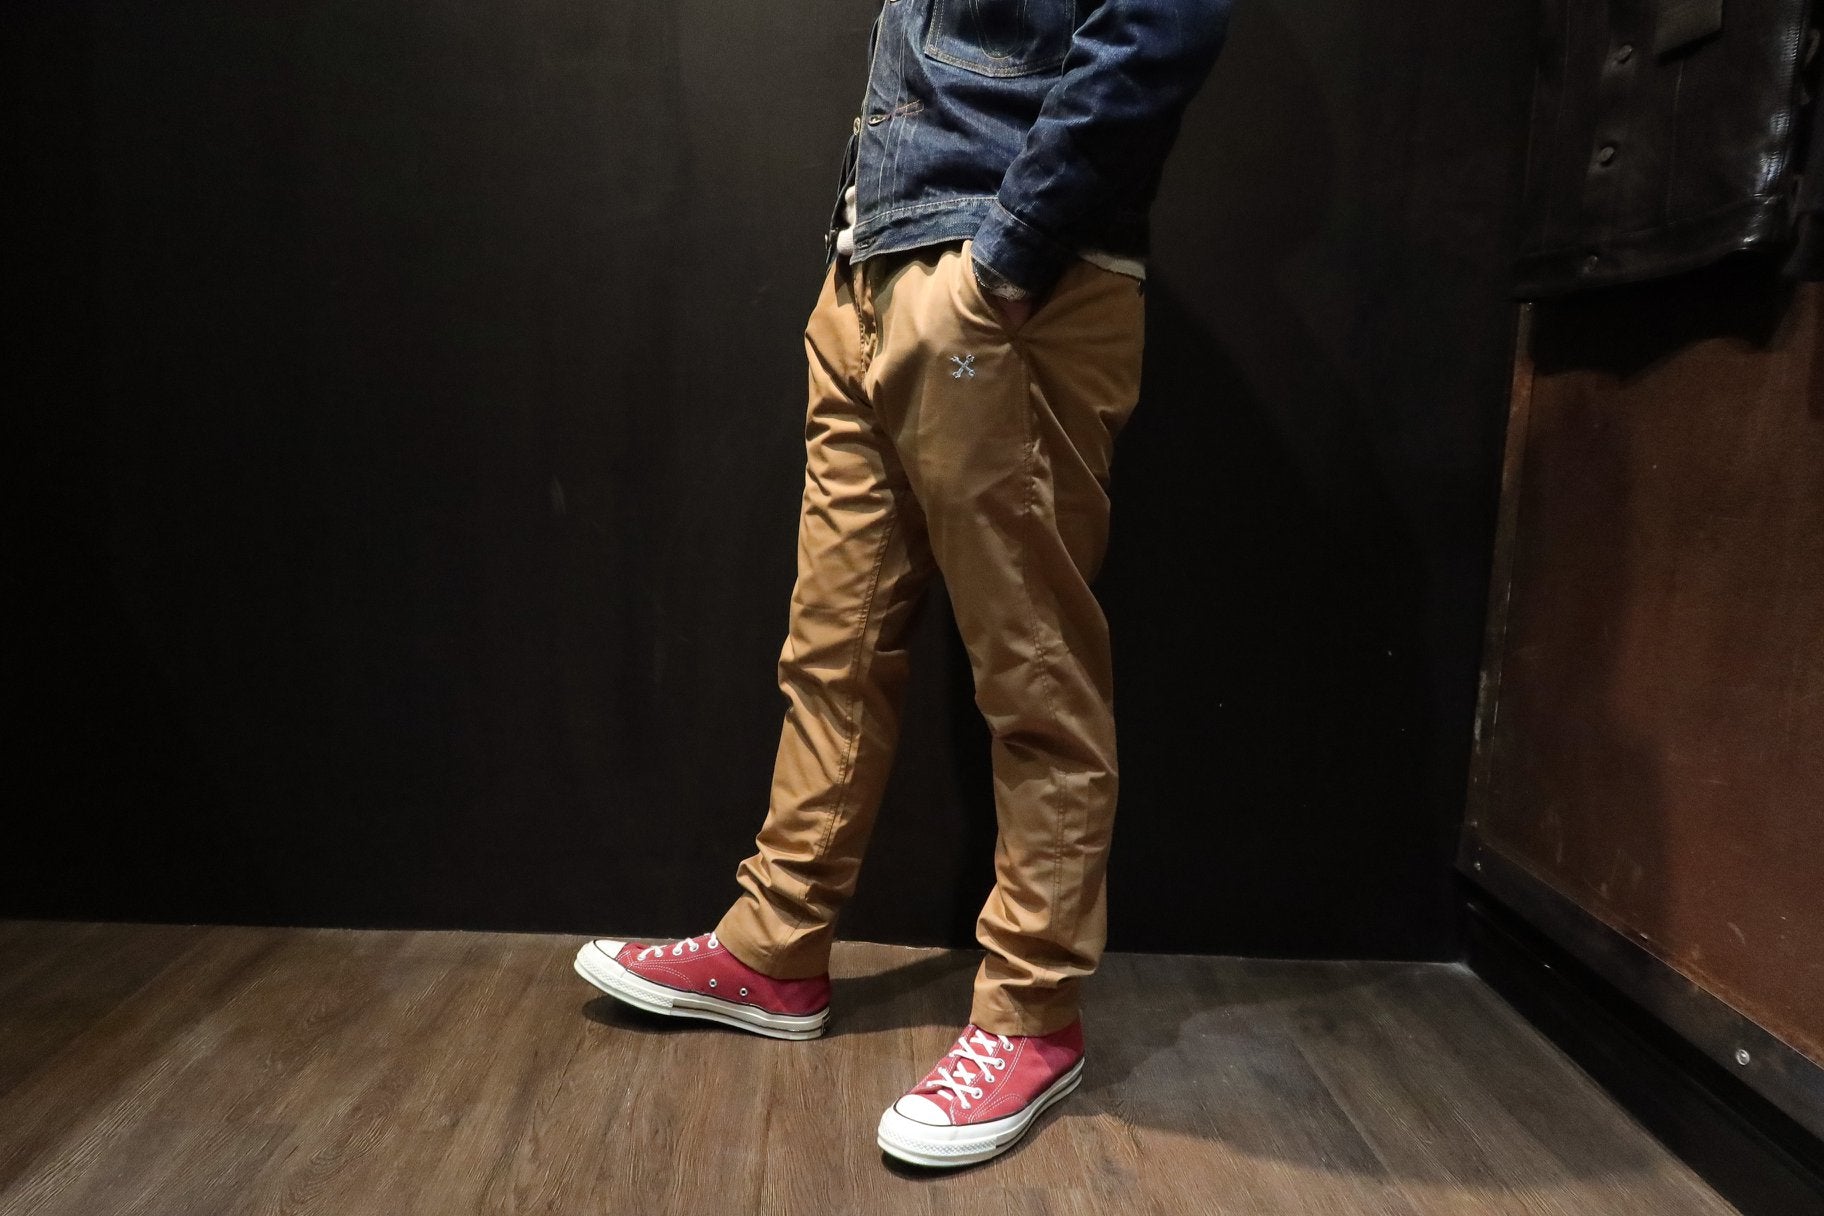 May club -【BLUCO】KNICKERS WORK PANTS (LIGHT) - CAMEL